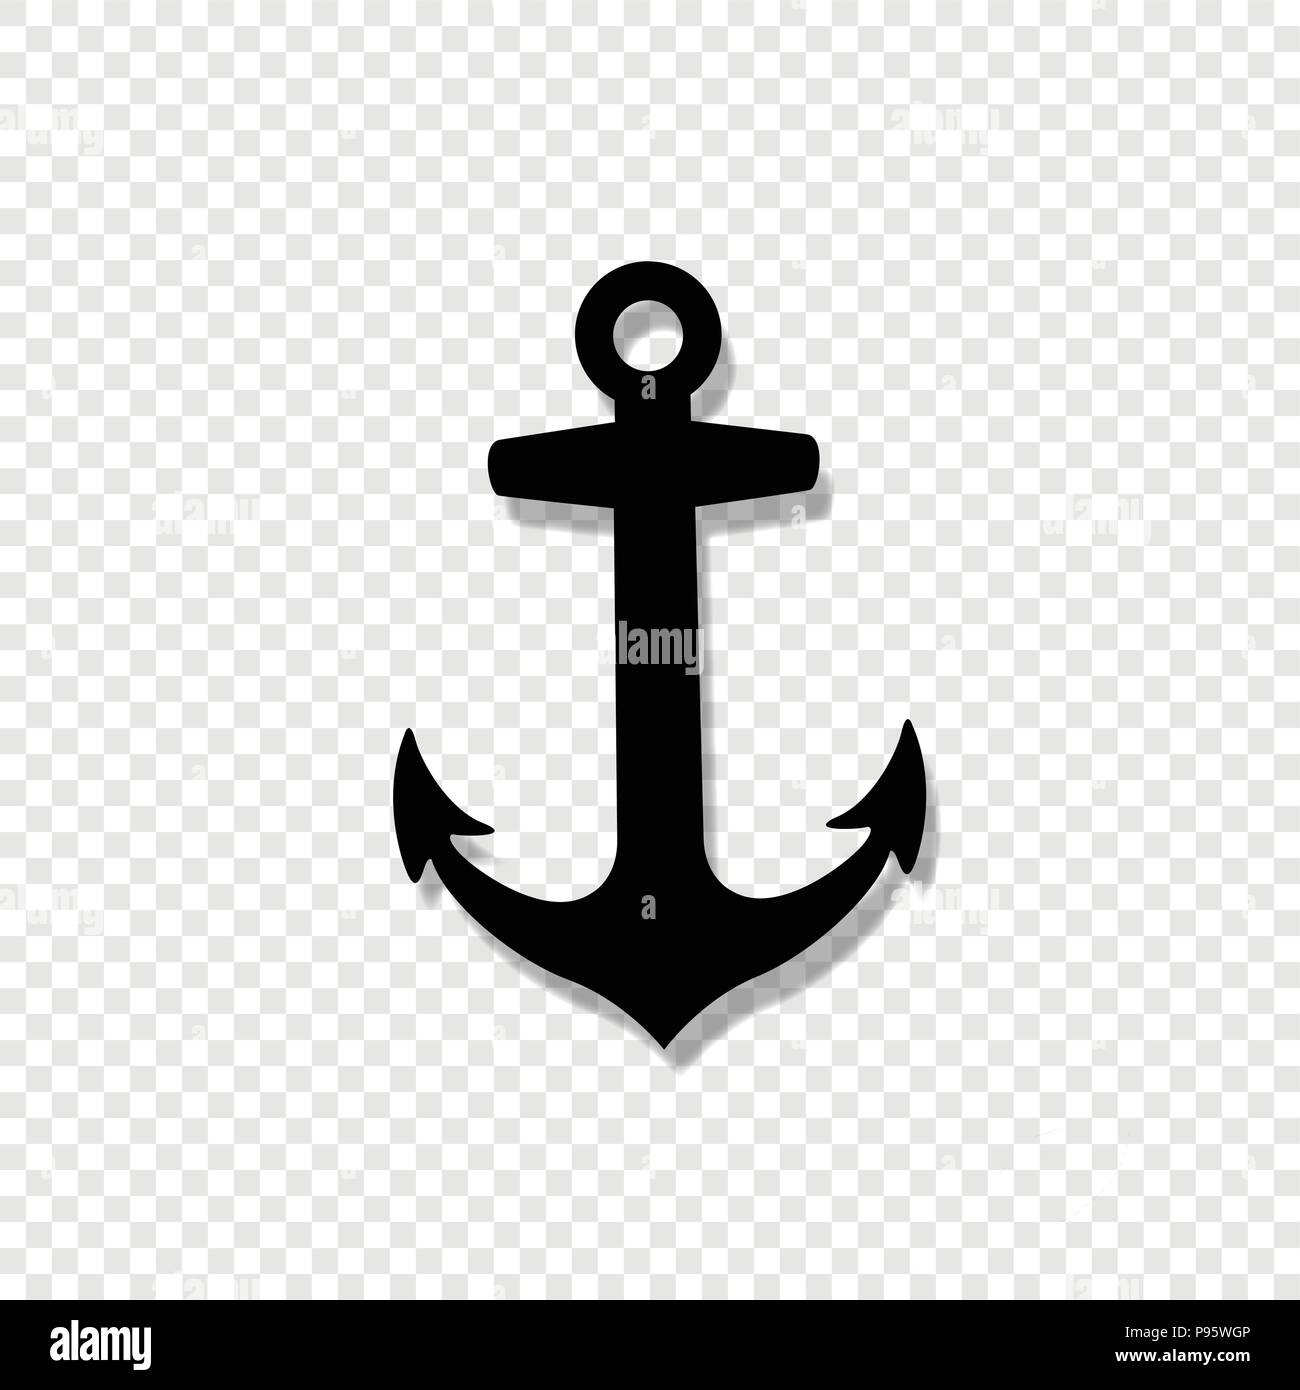 Vector black silhouette illustration of anchor armature icon isolated on transparent background. Stock Vector